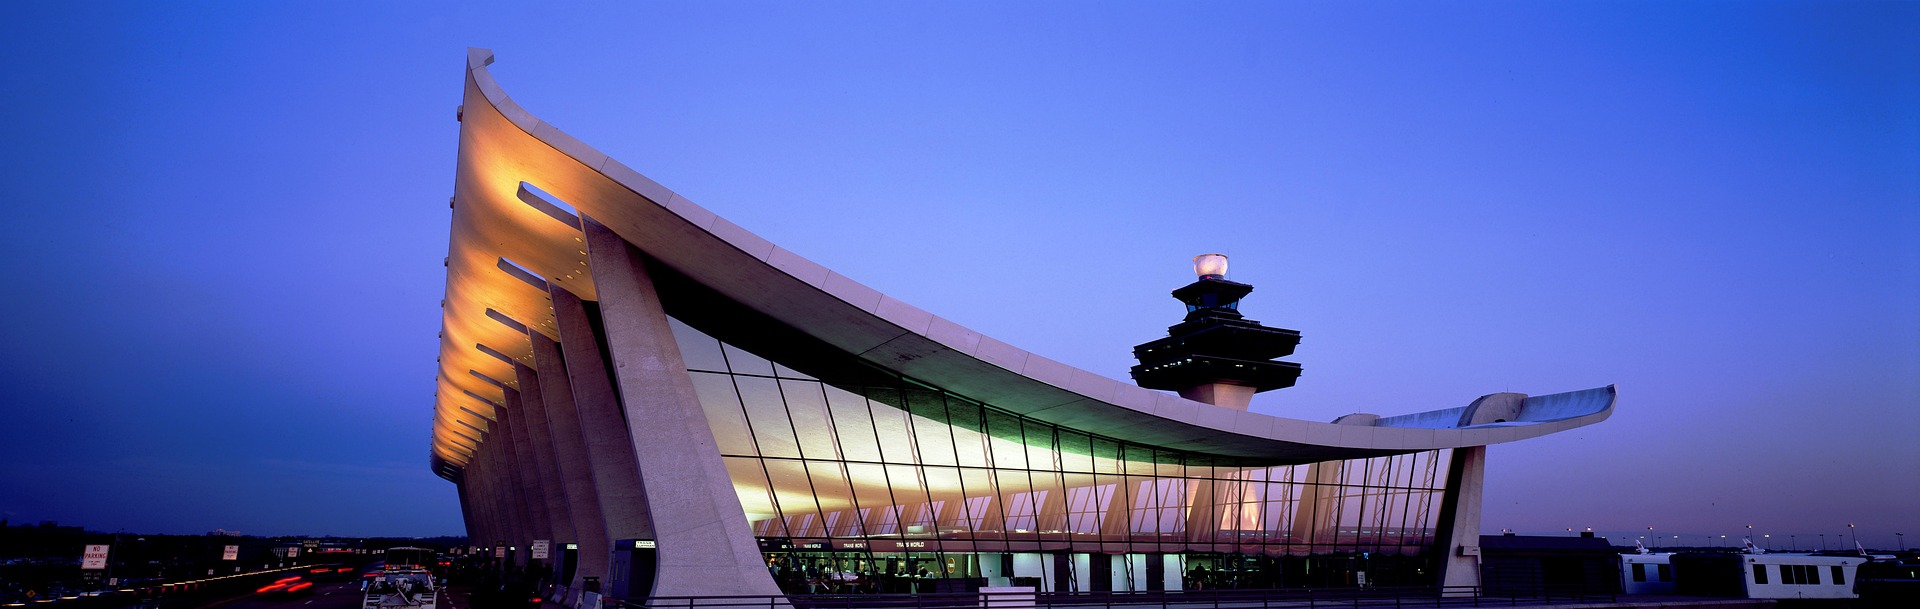 Top 60 Airport Terminal Contractors + CM Firms for 2022 dulles-1651537_1920